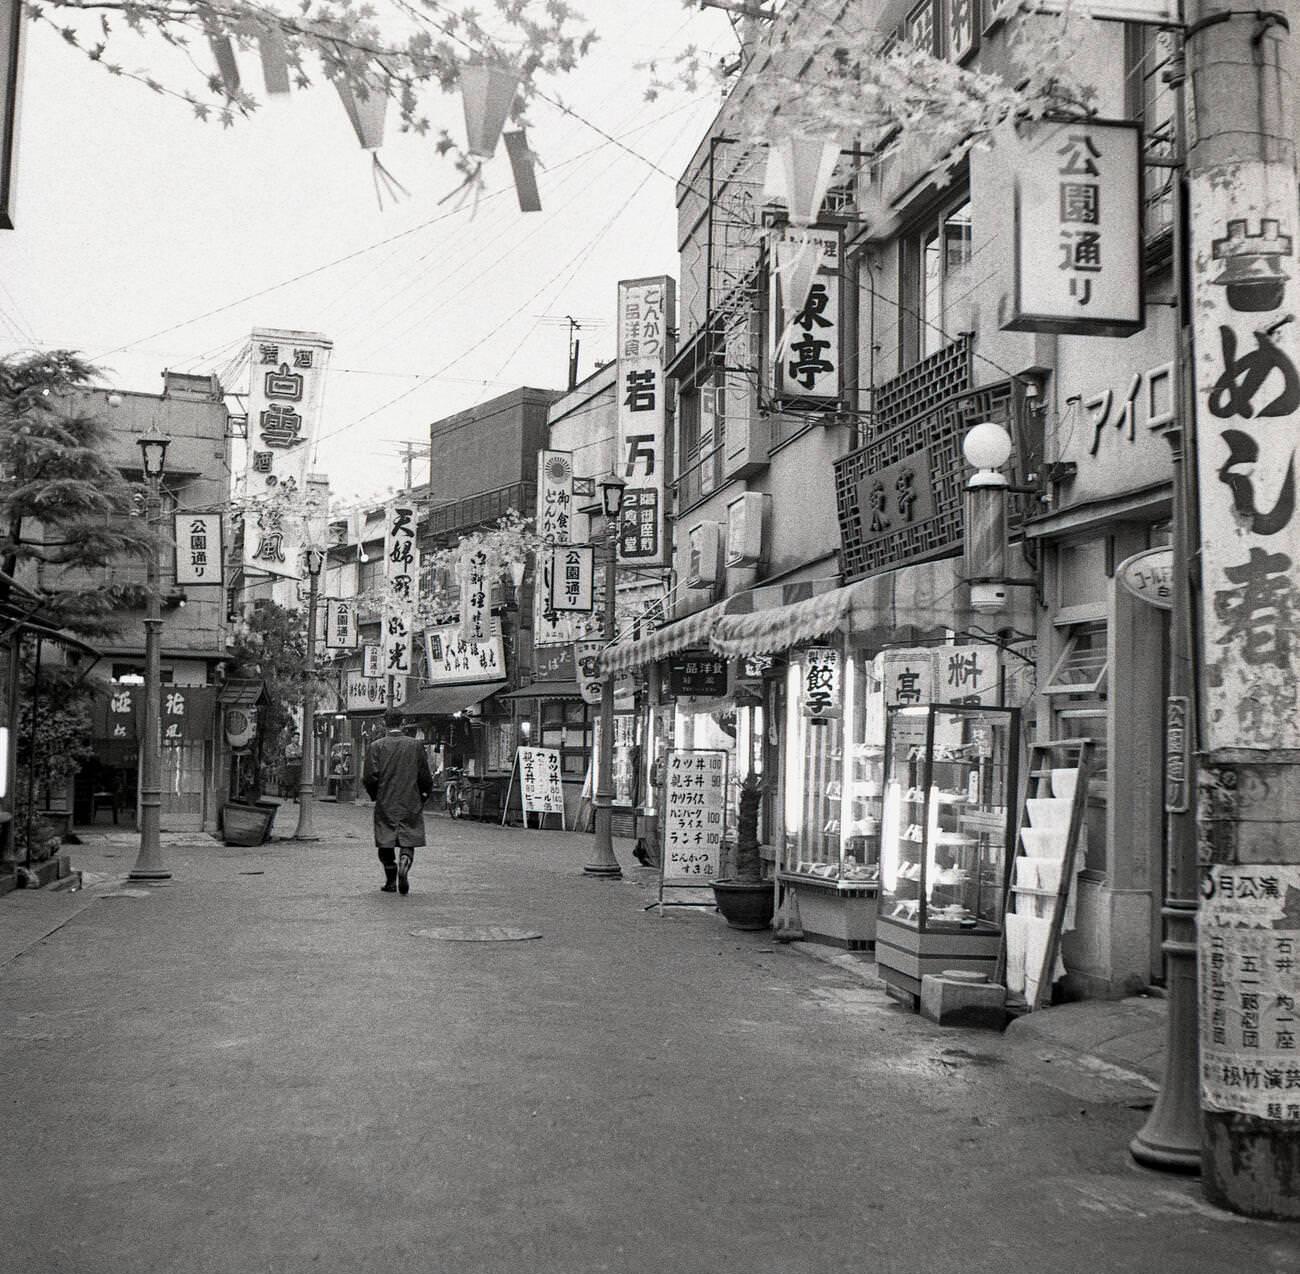 A man walking down pass the retail stores and buildings in a quiet side-street in Tokyo, 1950s.